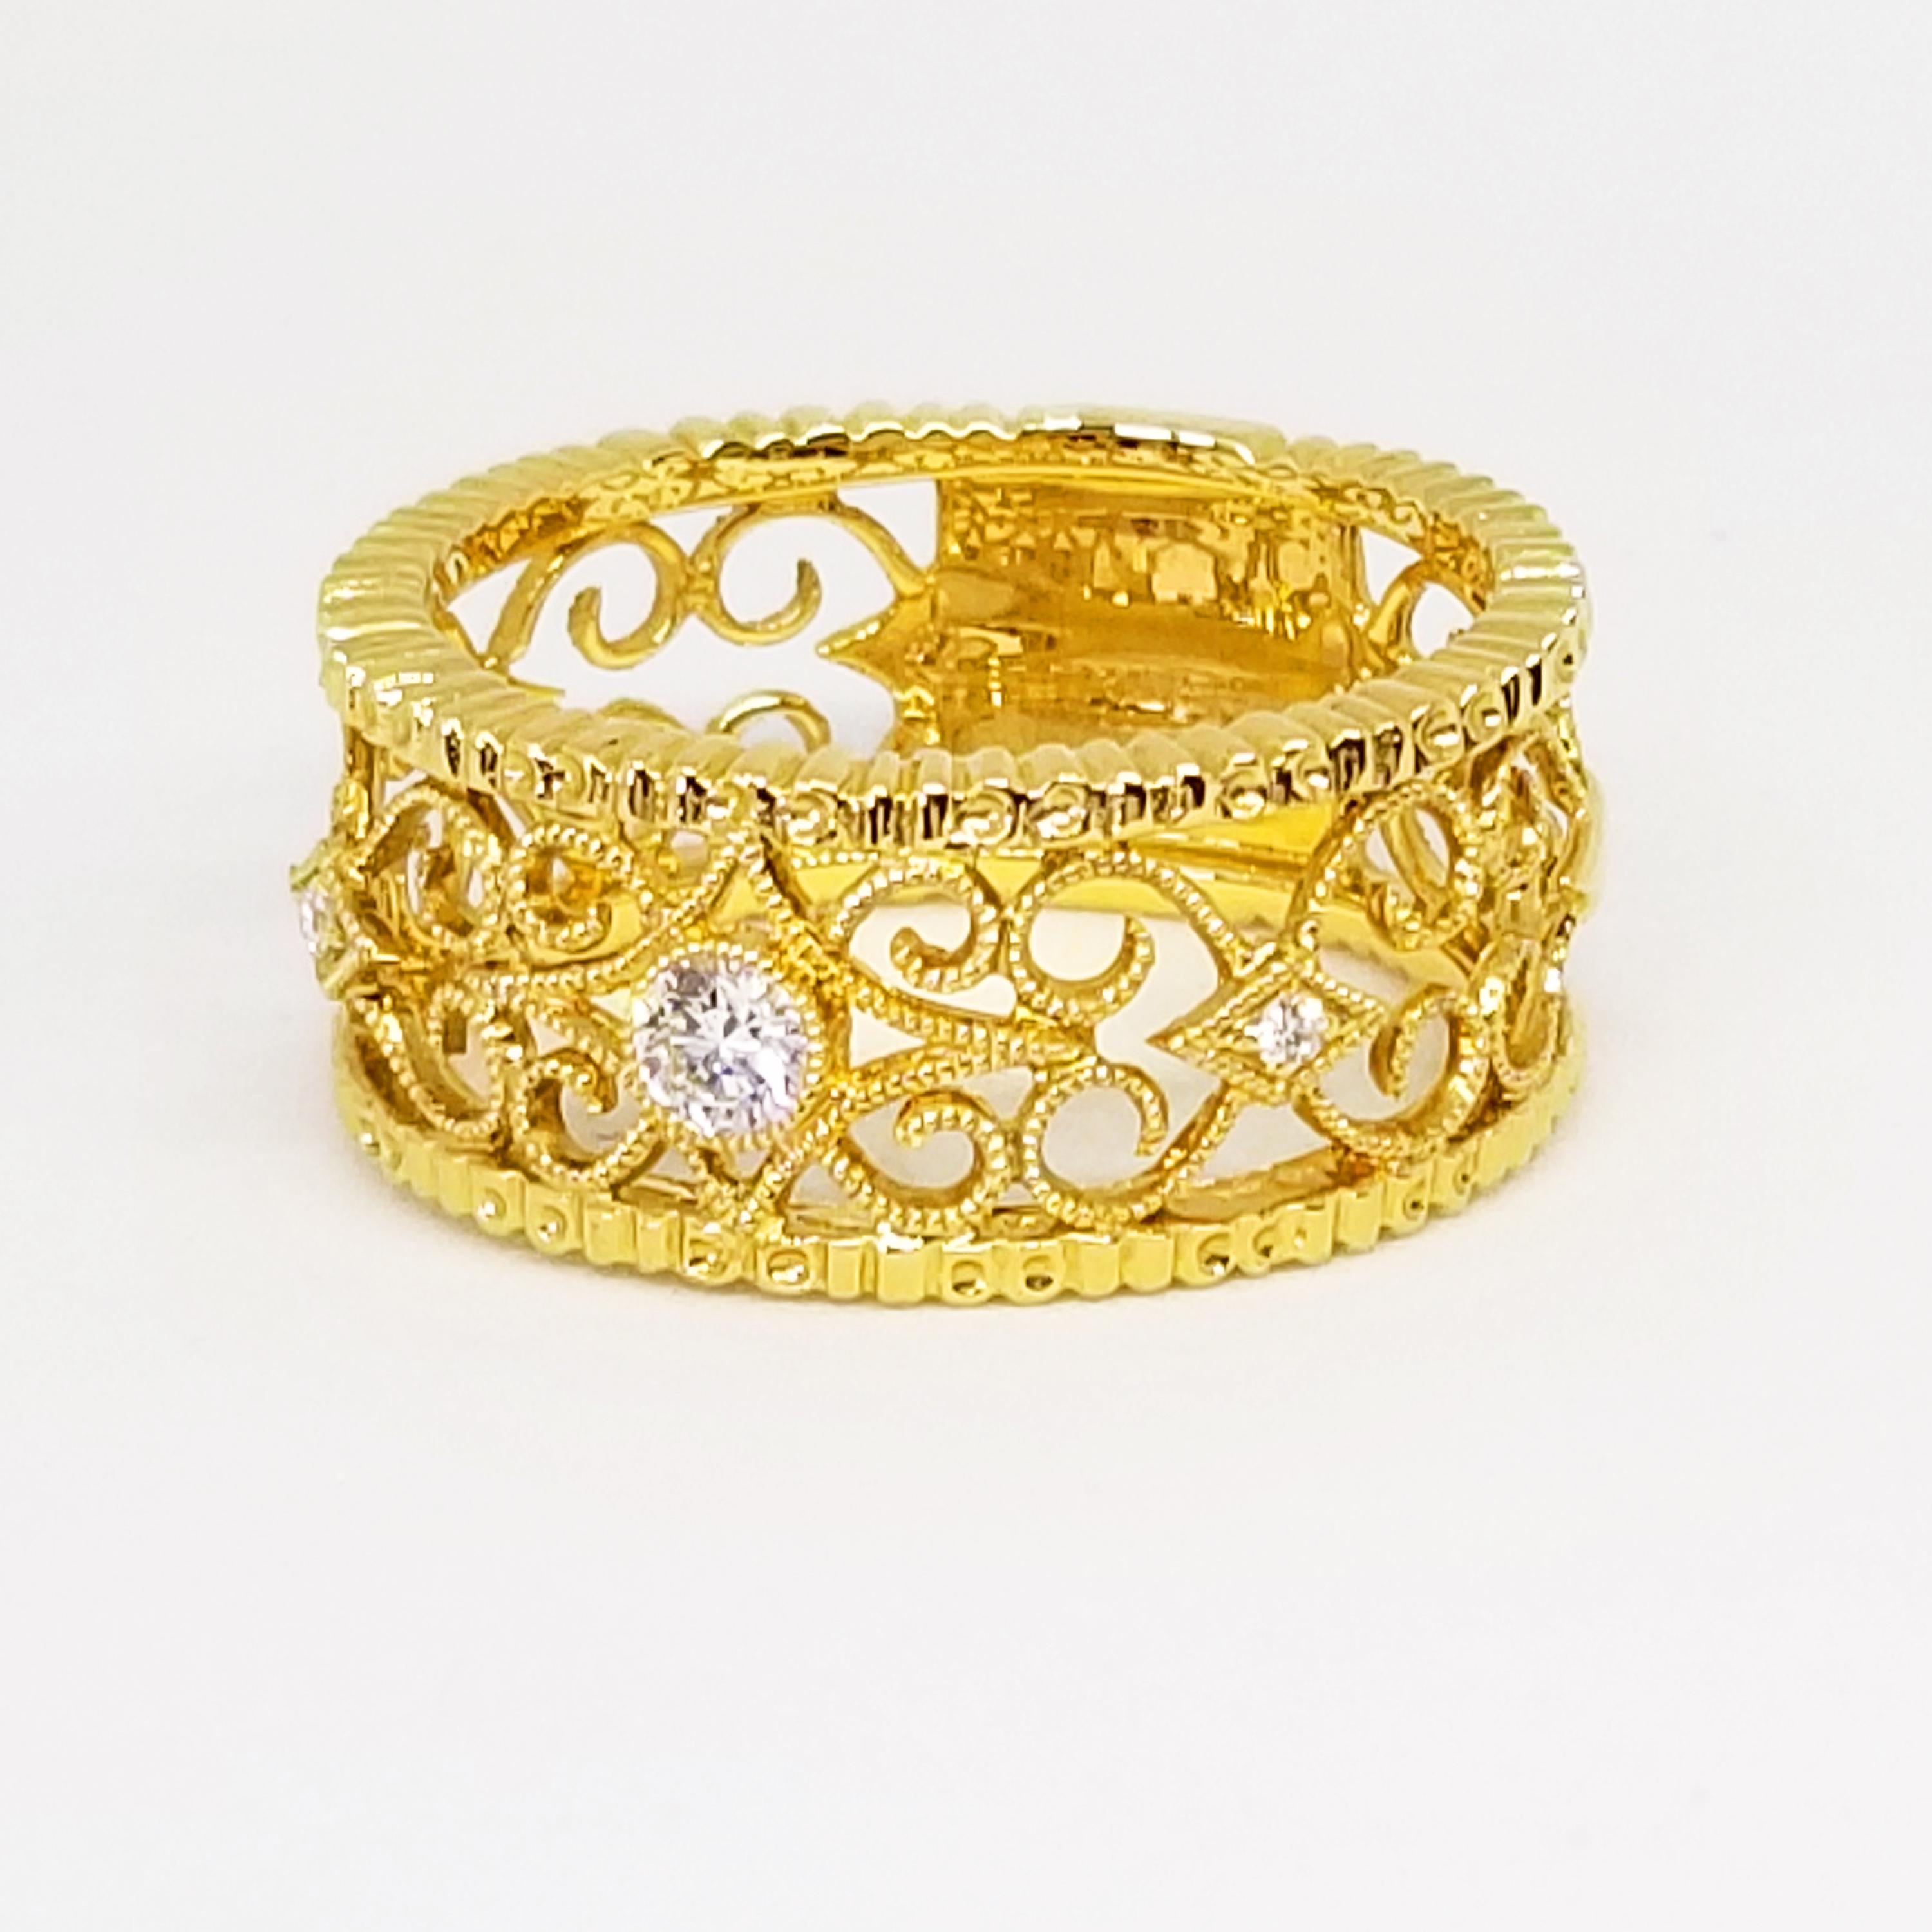 This Feminine Filigree Eternity Ring features three Round Brilliant Diamonds of 0.12 Carat total weight, G-H Color and Si1 Clarity. The center Diamond is bezel set and the Diamond on either side is bead set. The Intricate Band features an open work,